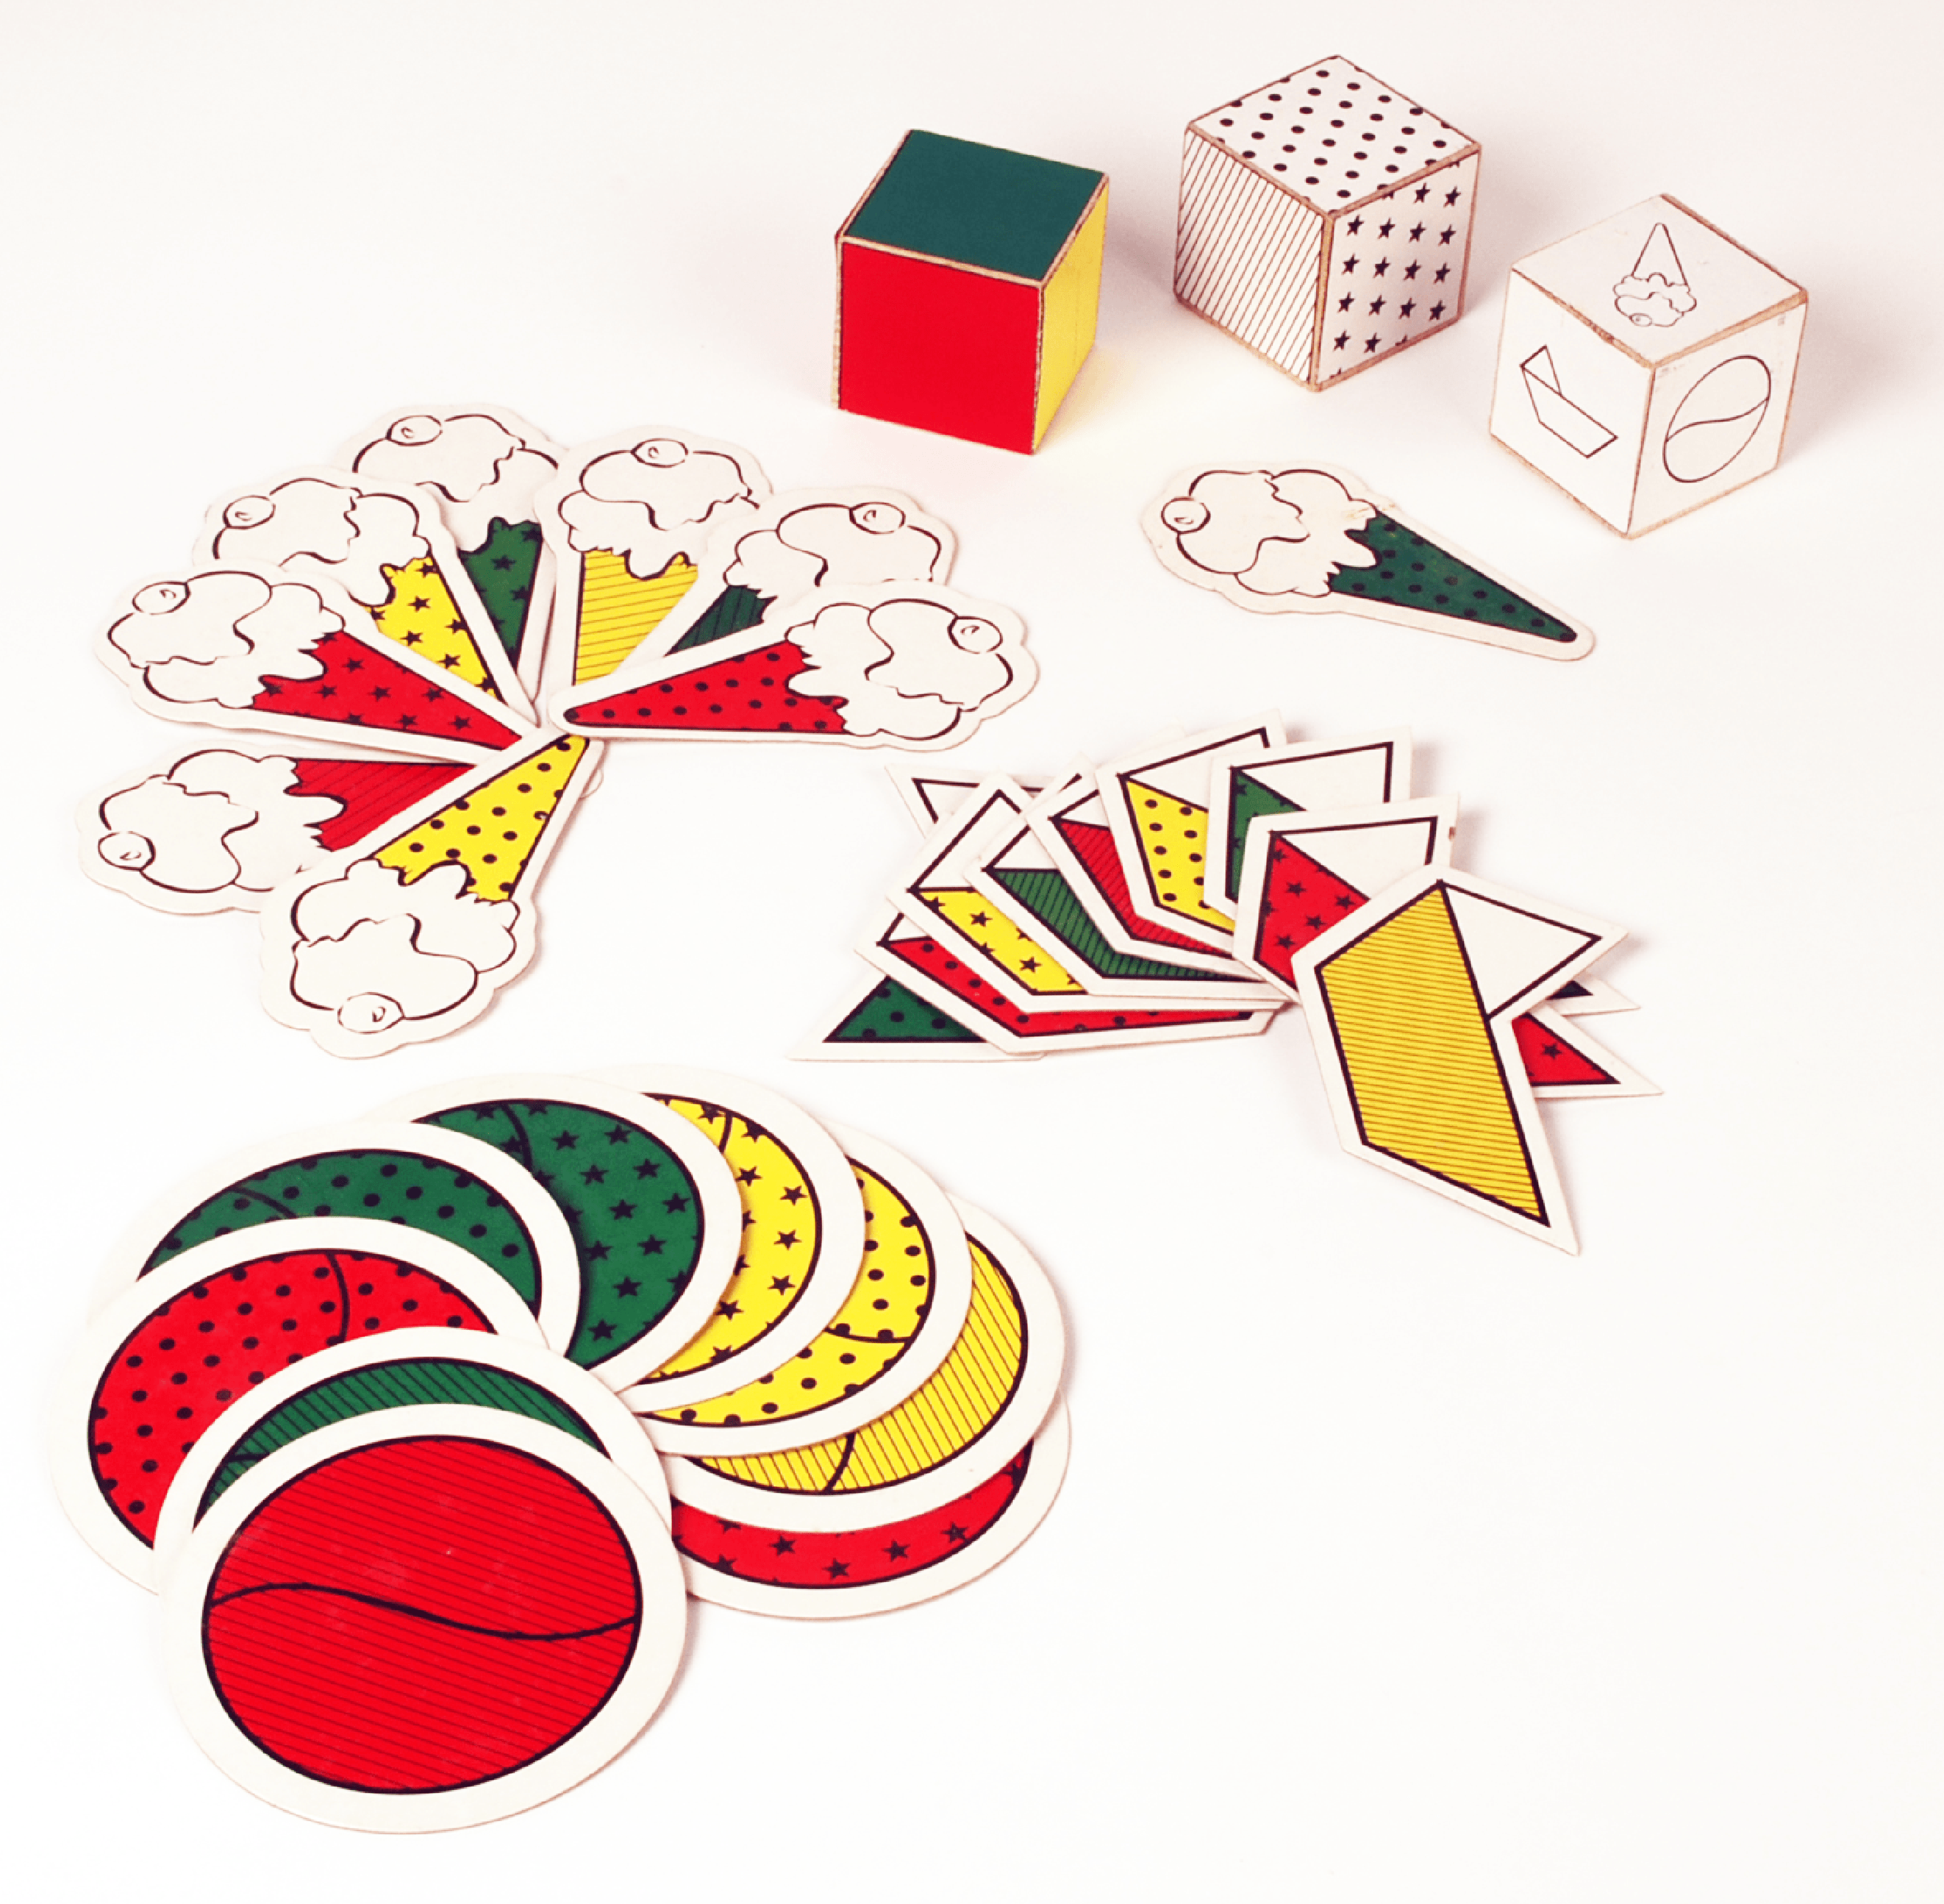 Shape, Colour, Pattern, Dice - Classification Game for Cognitive Mathematical Learning  (Classification Skills)